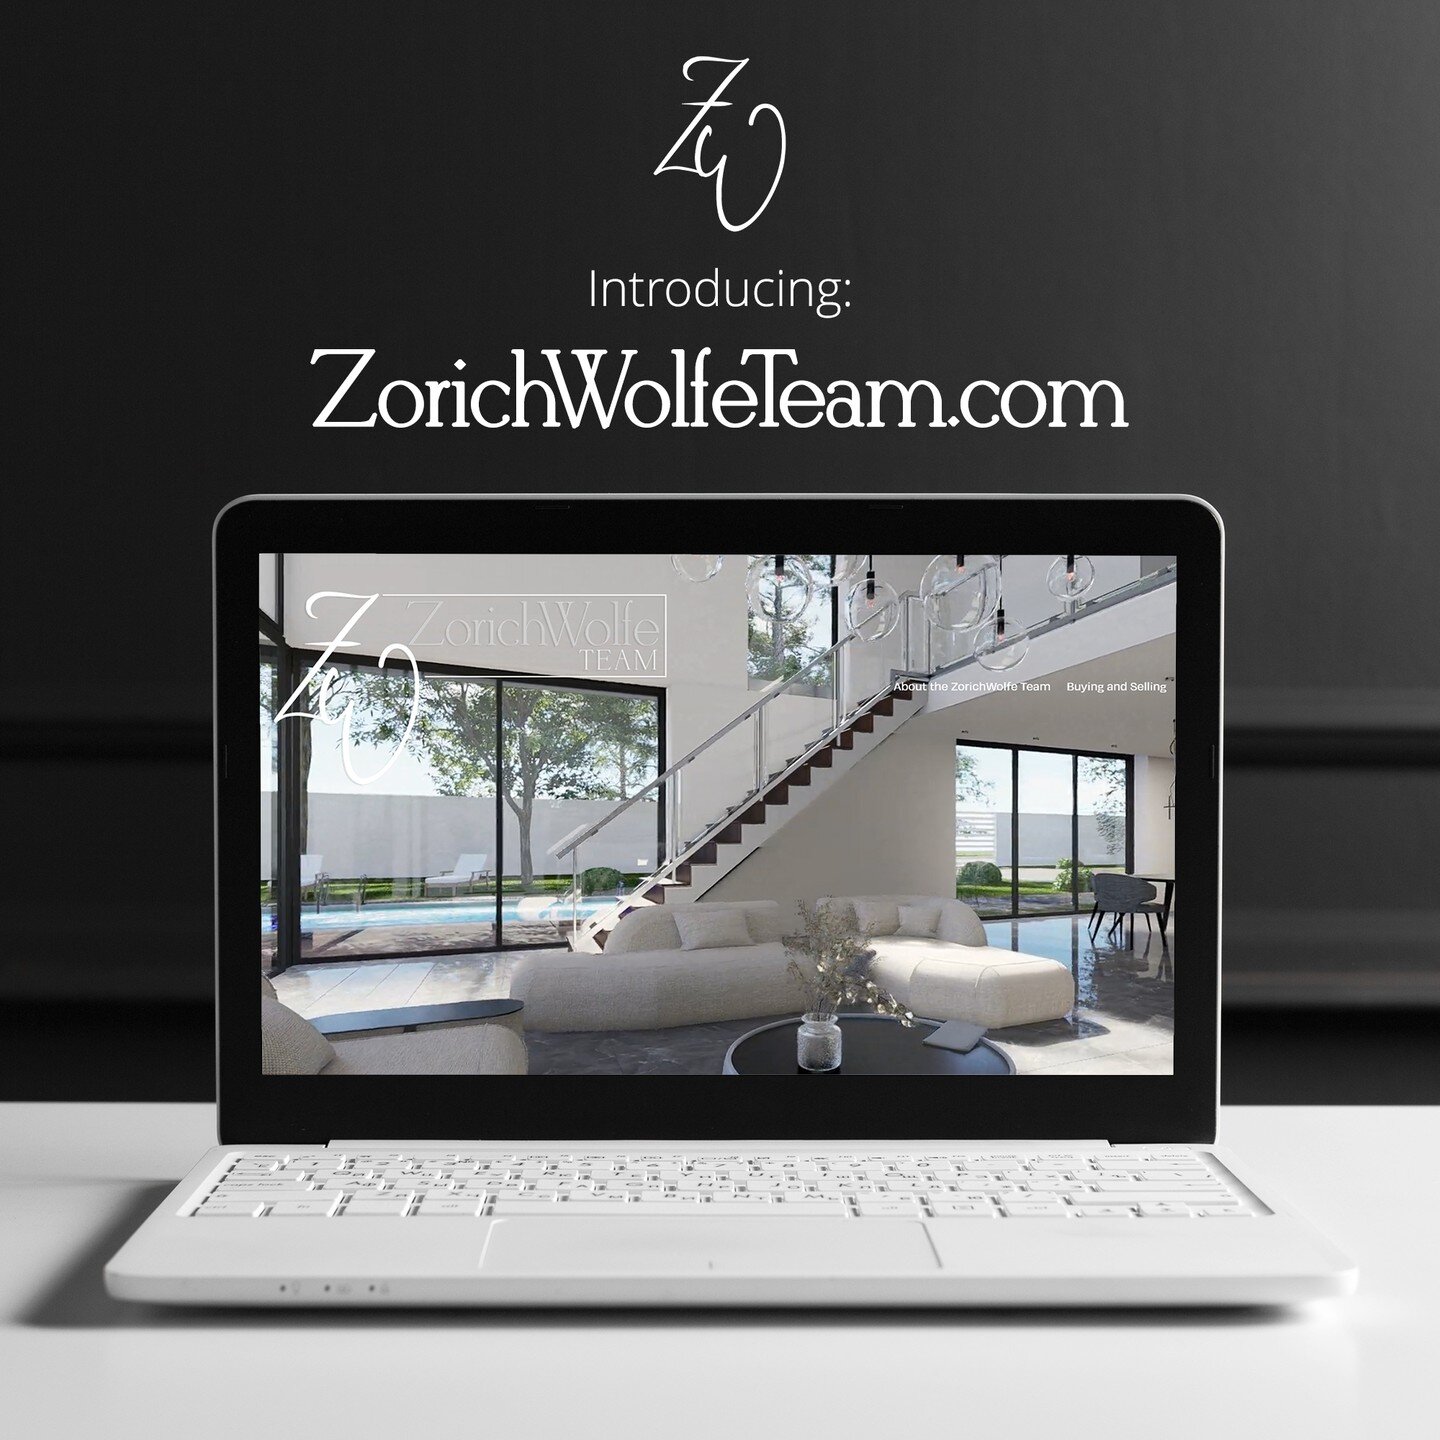 I am SO pleased to introduce the new logo and website for the ZorichWolfe Team! Check them out at ZorichWolfeTeam.com

#esperluettecreative #designingforrealestate #zorichwolfe #websitedesign #logodesigner